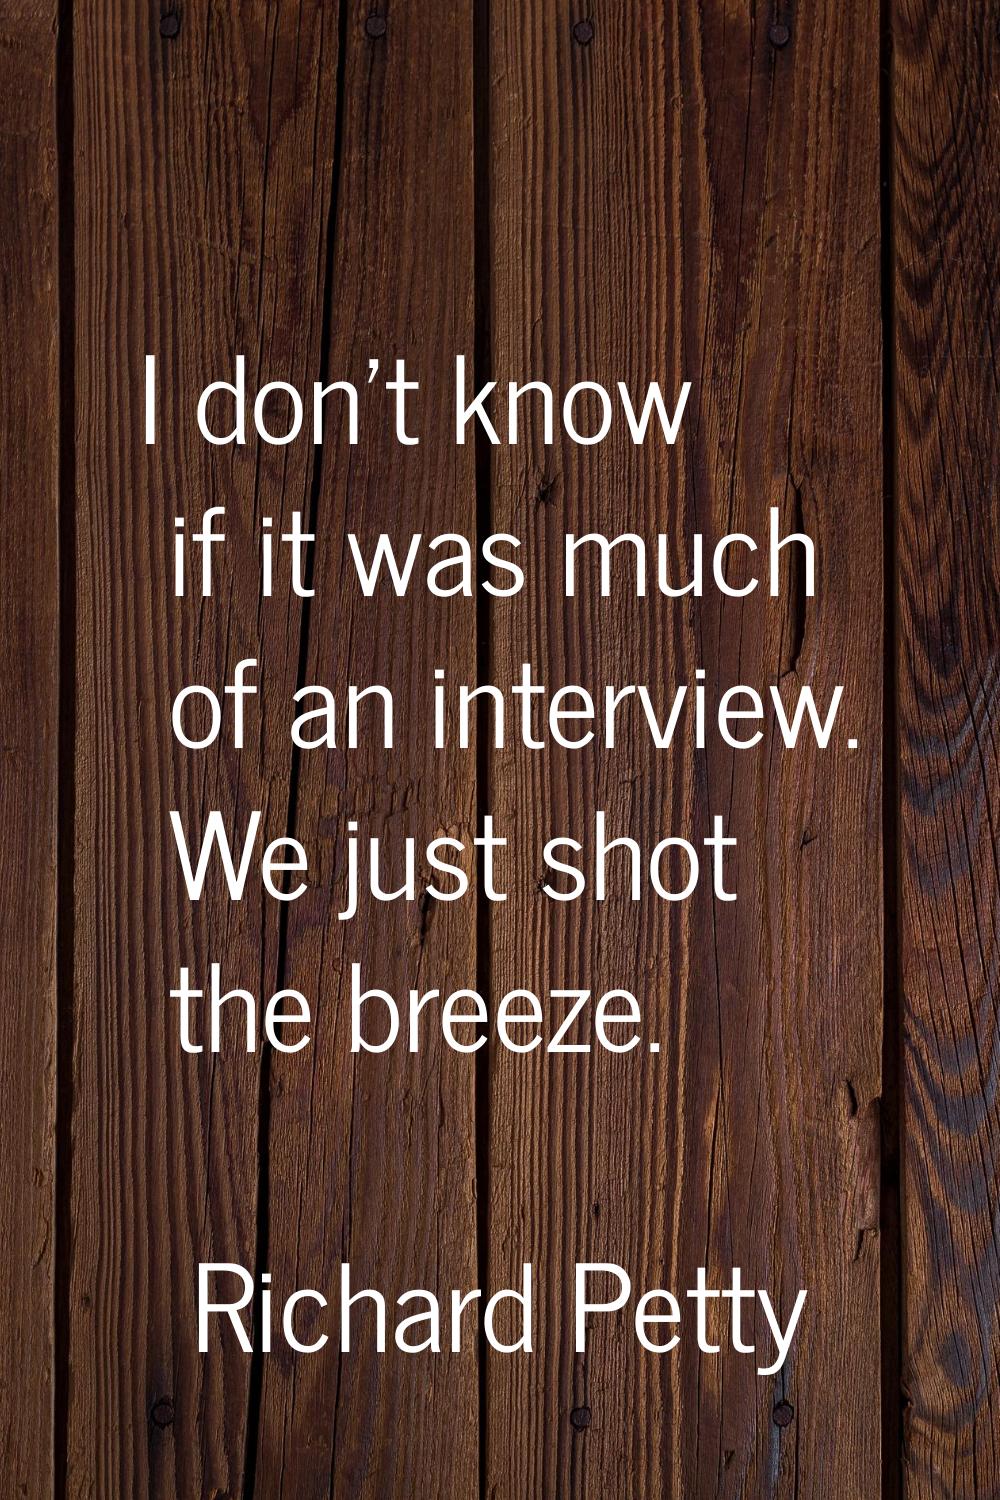 I don't know if it was much of an interview. We just shot the breeze.